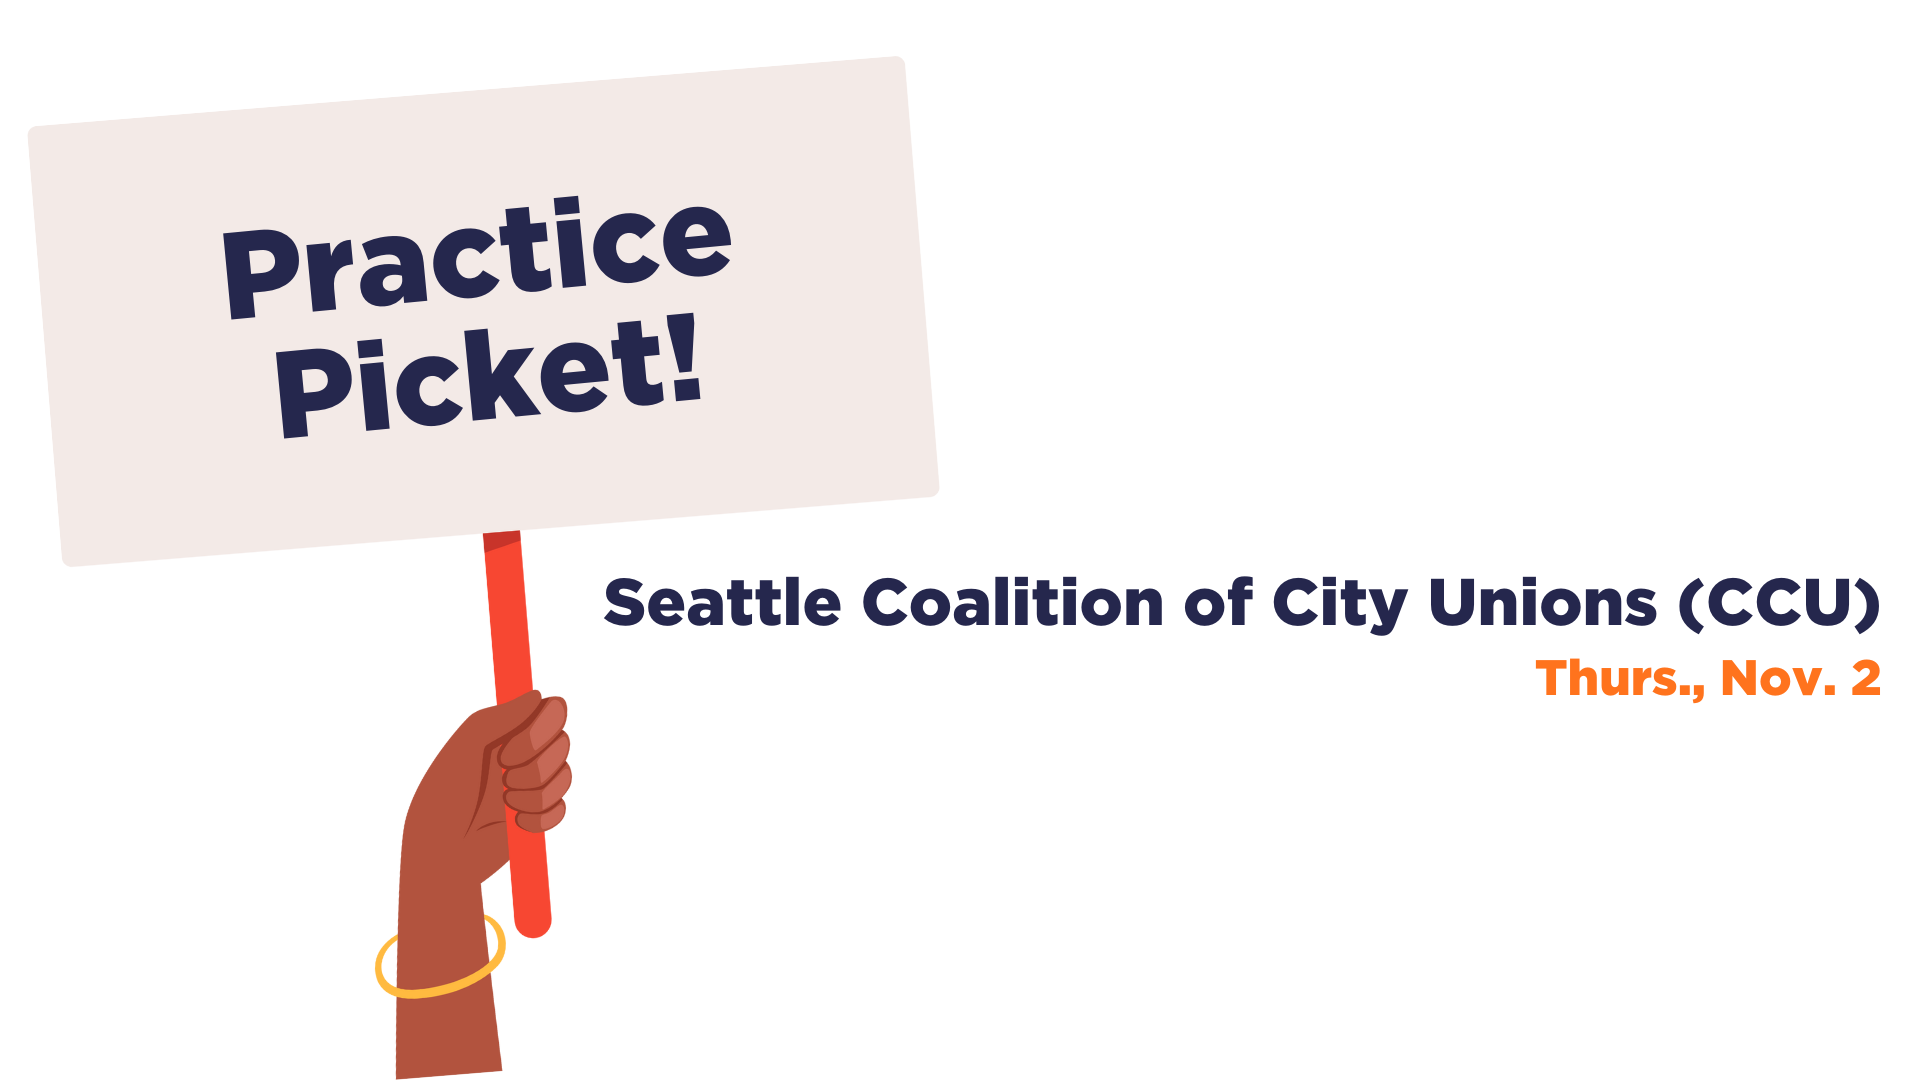 There is an illustration of a hand holding up a picket sign that reads, "Practice Picket!" The text next to the illustration reads, "Seattle Coalition of City Unions (CCU) Thurs., Nov. 2"